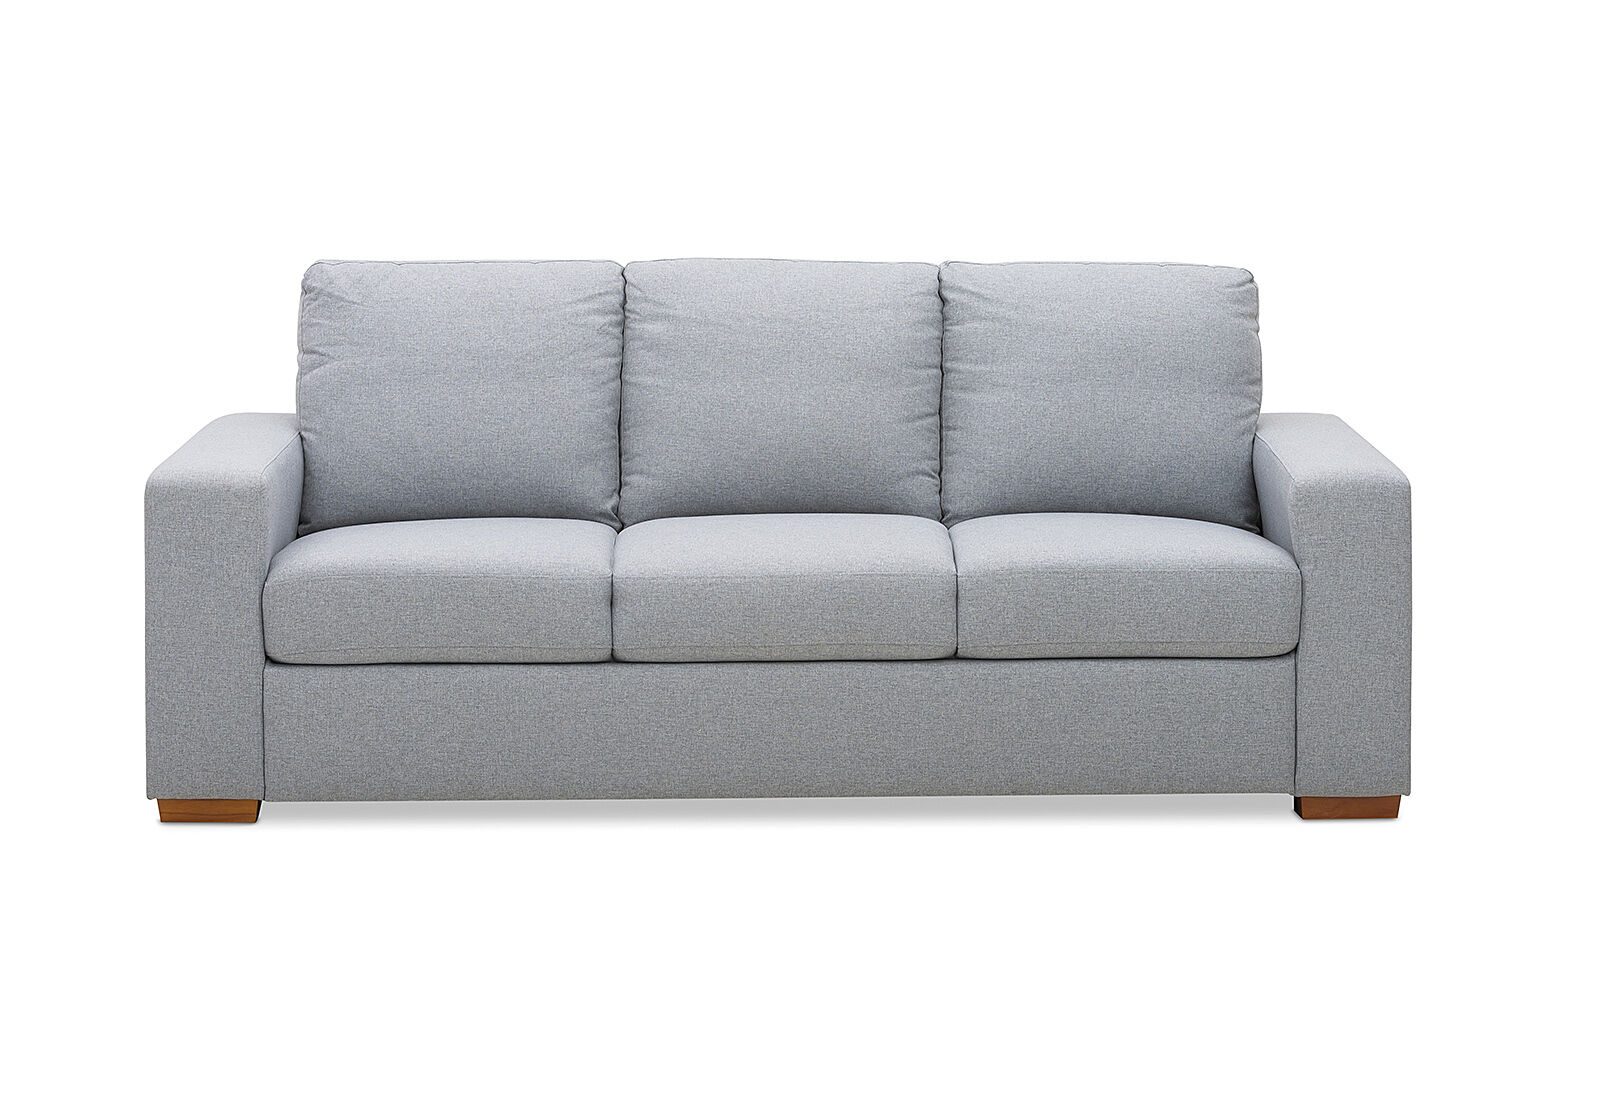 Light Grey Nixon Fabric 3 Seater Sofa, How Much Fabric For A 3 Seater Sofa